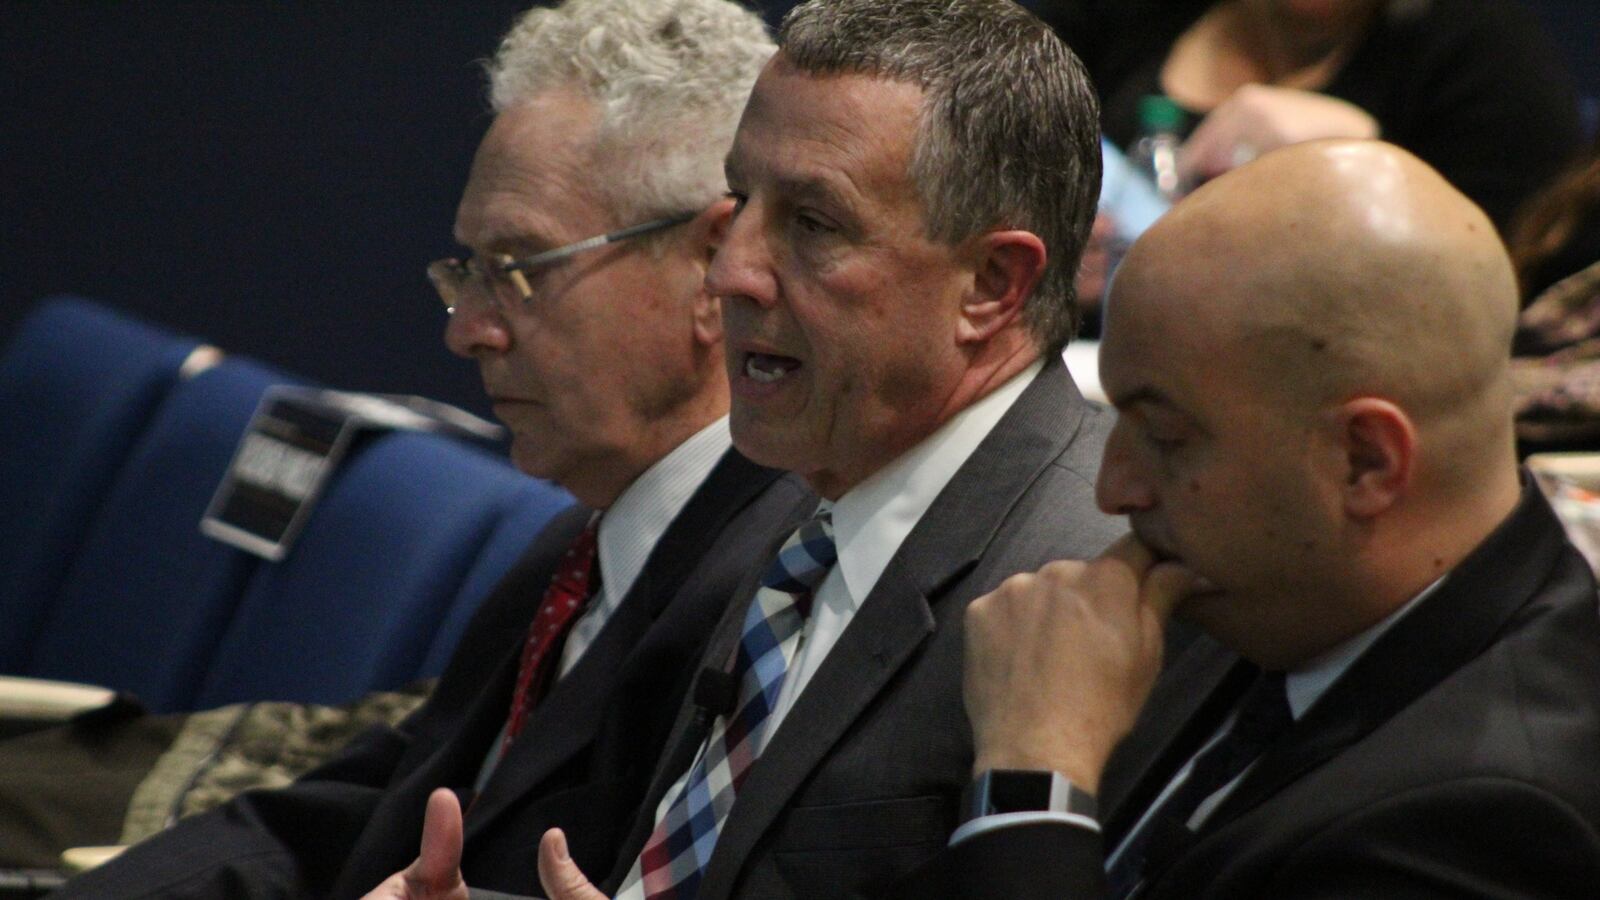 Dan Quisenberry, second from left, testifies before the Michigan Civil Rights Commission on Monday as Wayne State University finance professor Michael Addonizio and Superintendent Nikolai Vitti look on.